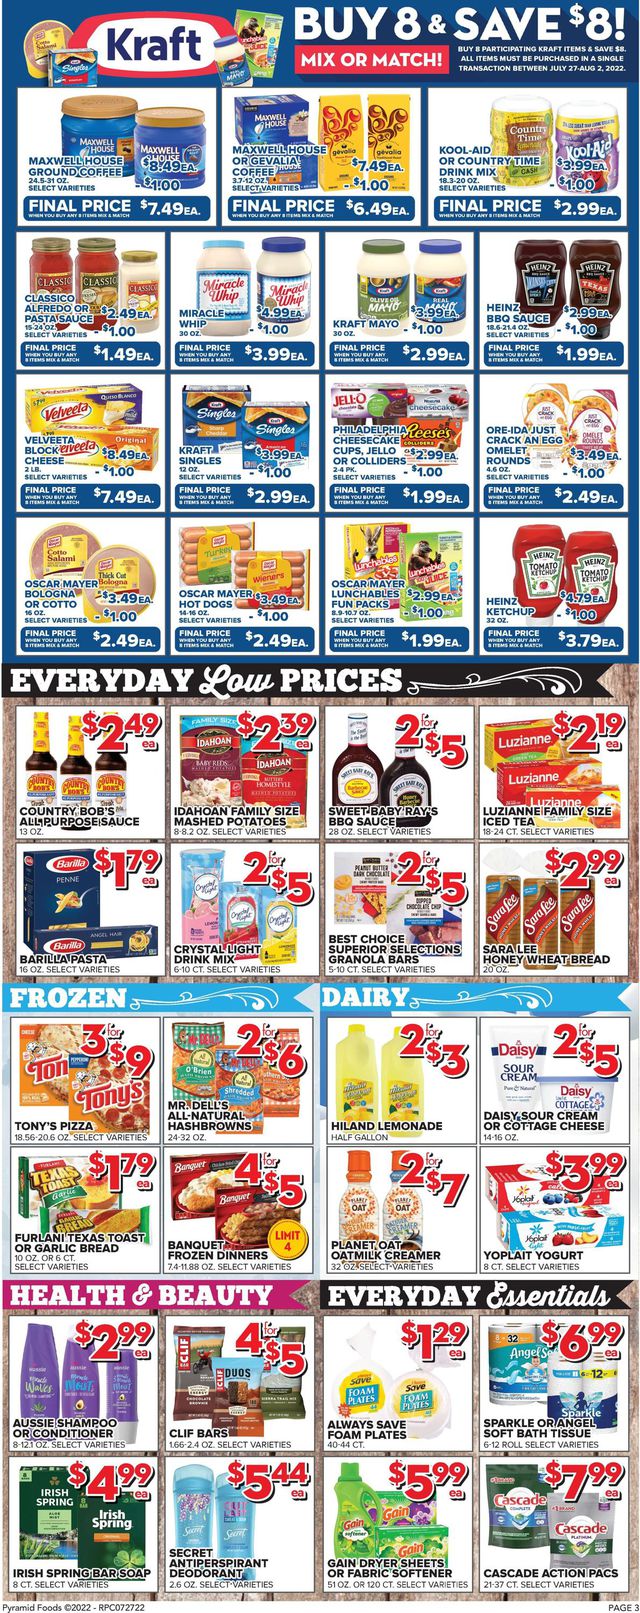 Price Cutter Ad from 07/27/2022